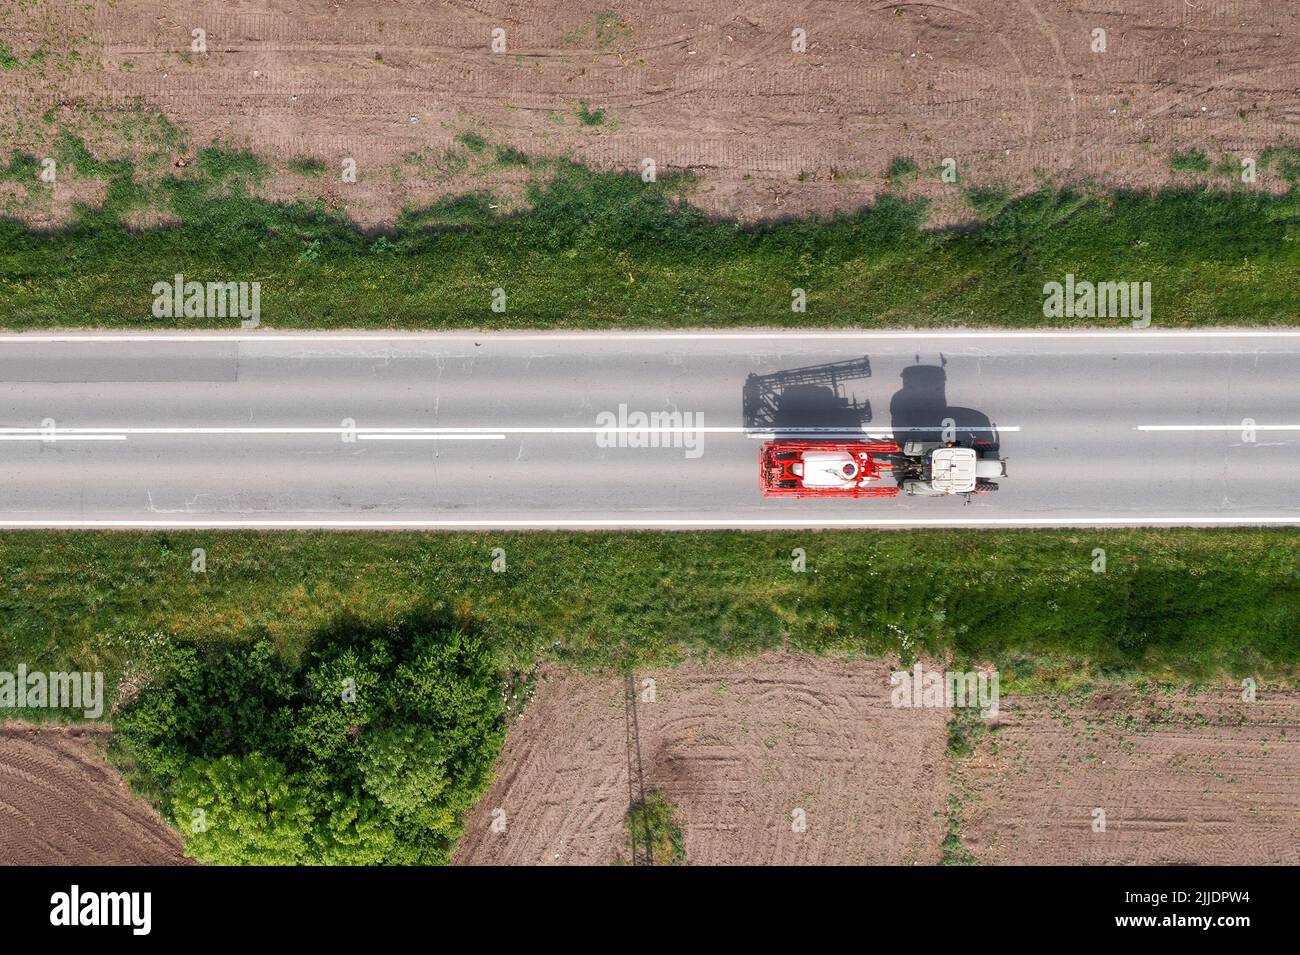 Agricultural tractor with crop sprayer attached driving along the road through countryside landscape, drone pov directly above aerial shot in agricult Stock Photo